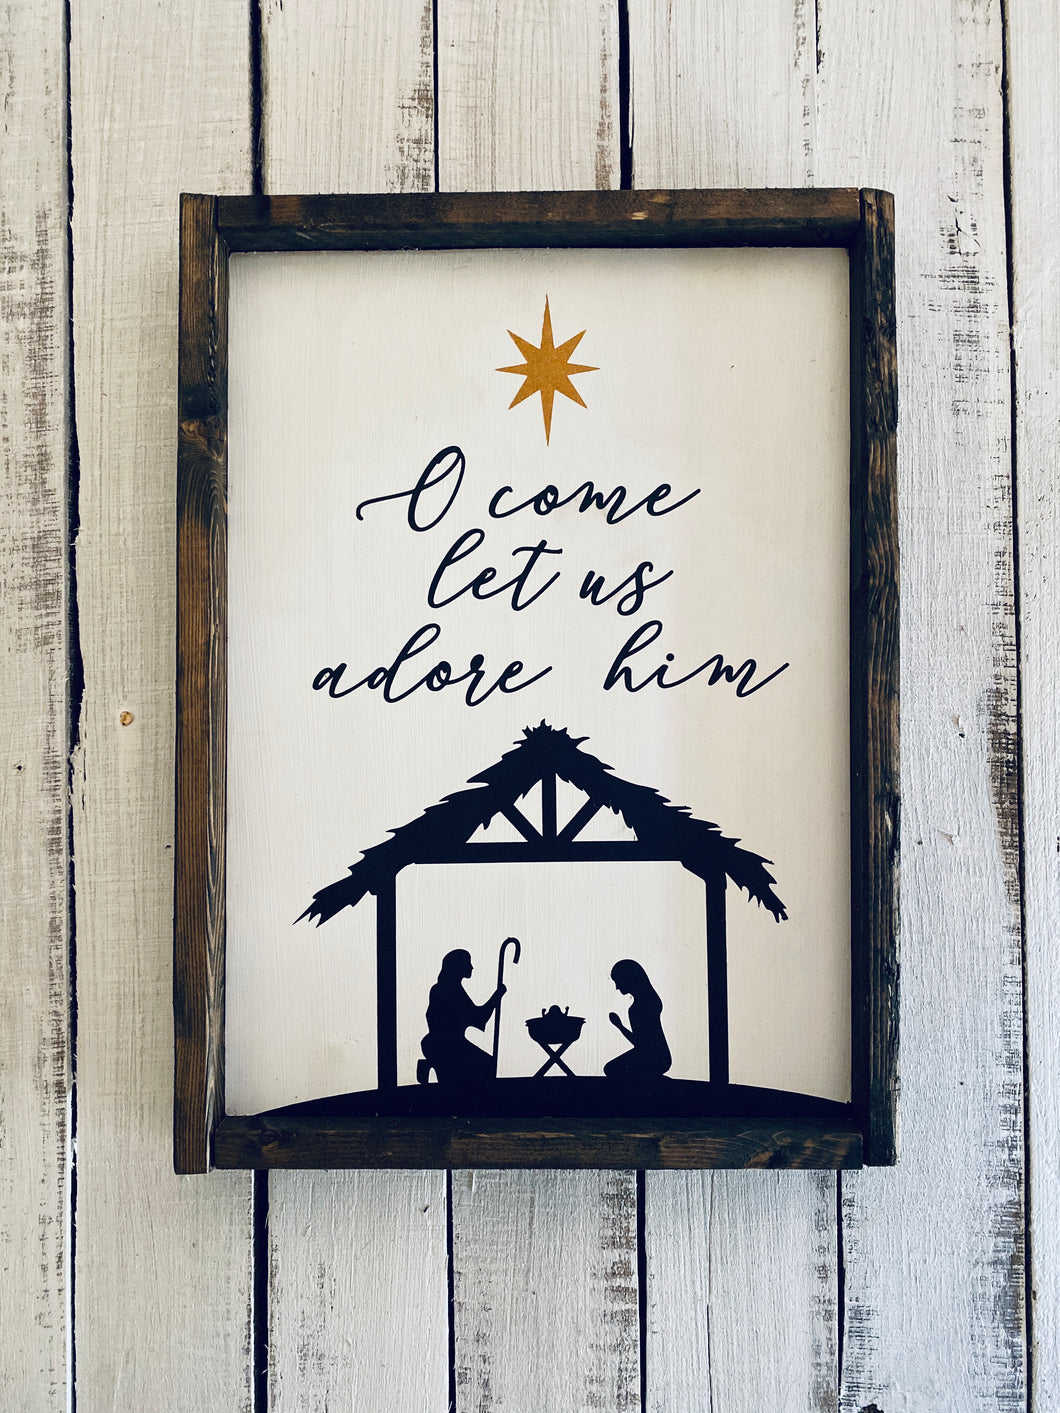 Let Us Adore Him Wood Sign - Christmas